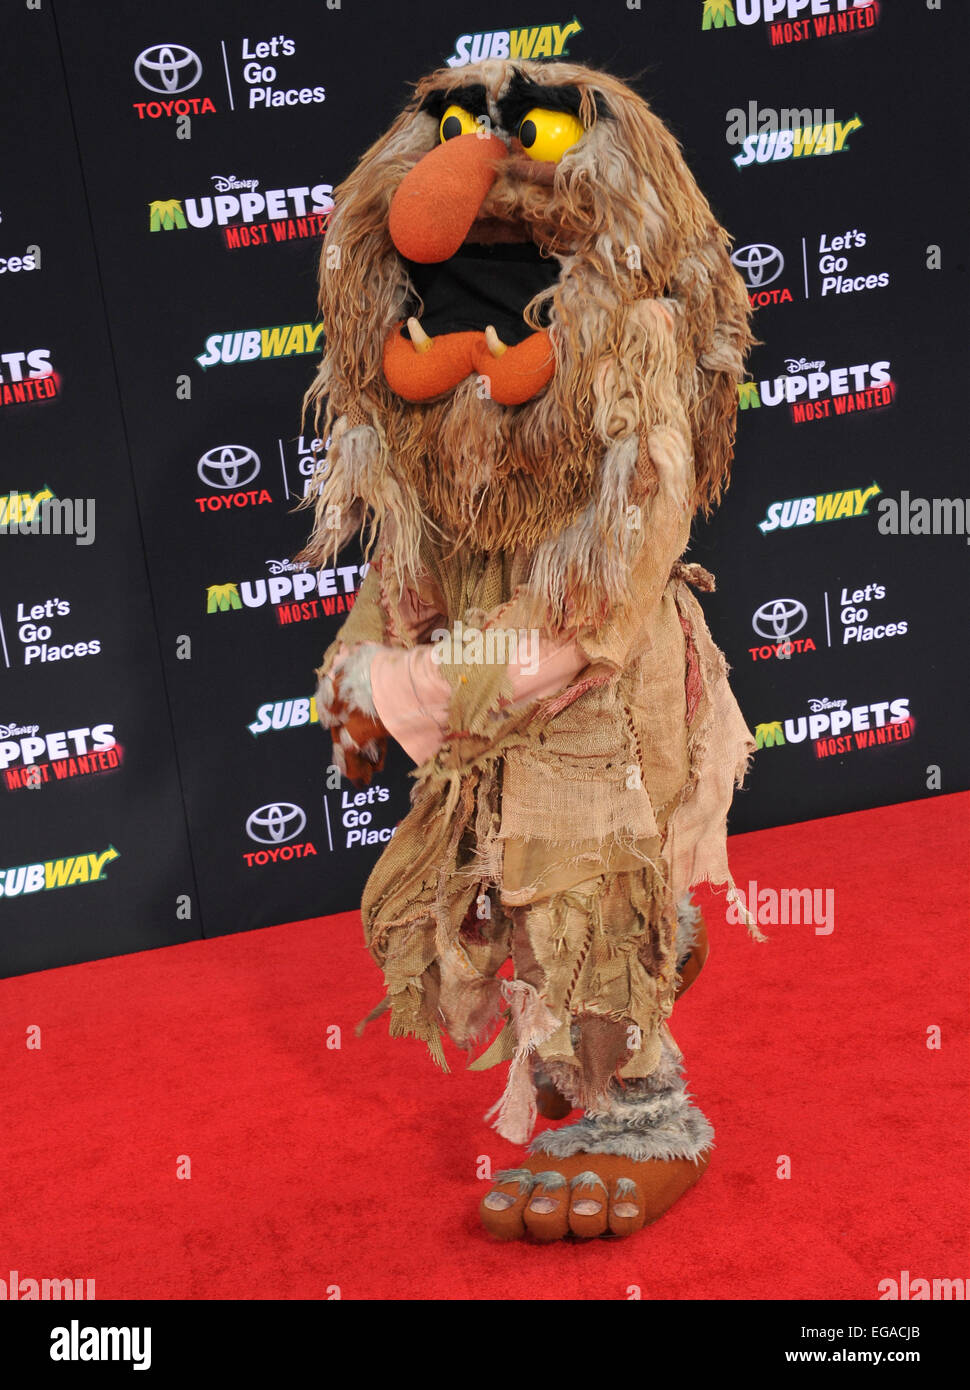 LOS ANGELES, CA - MARCH 11, 2014: Muppets' character Sweetums at the world premiere of her movie Disney's 'Muppets Most Wanted' at the El Capitan Theatre, Hollywood. Stock Photo